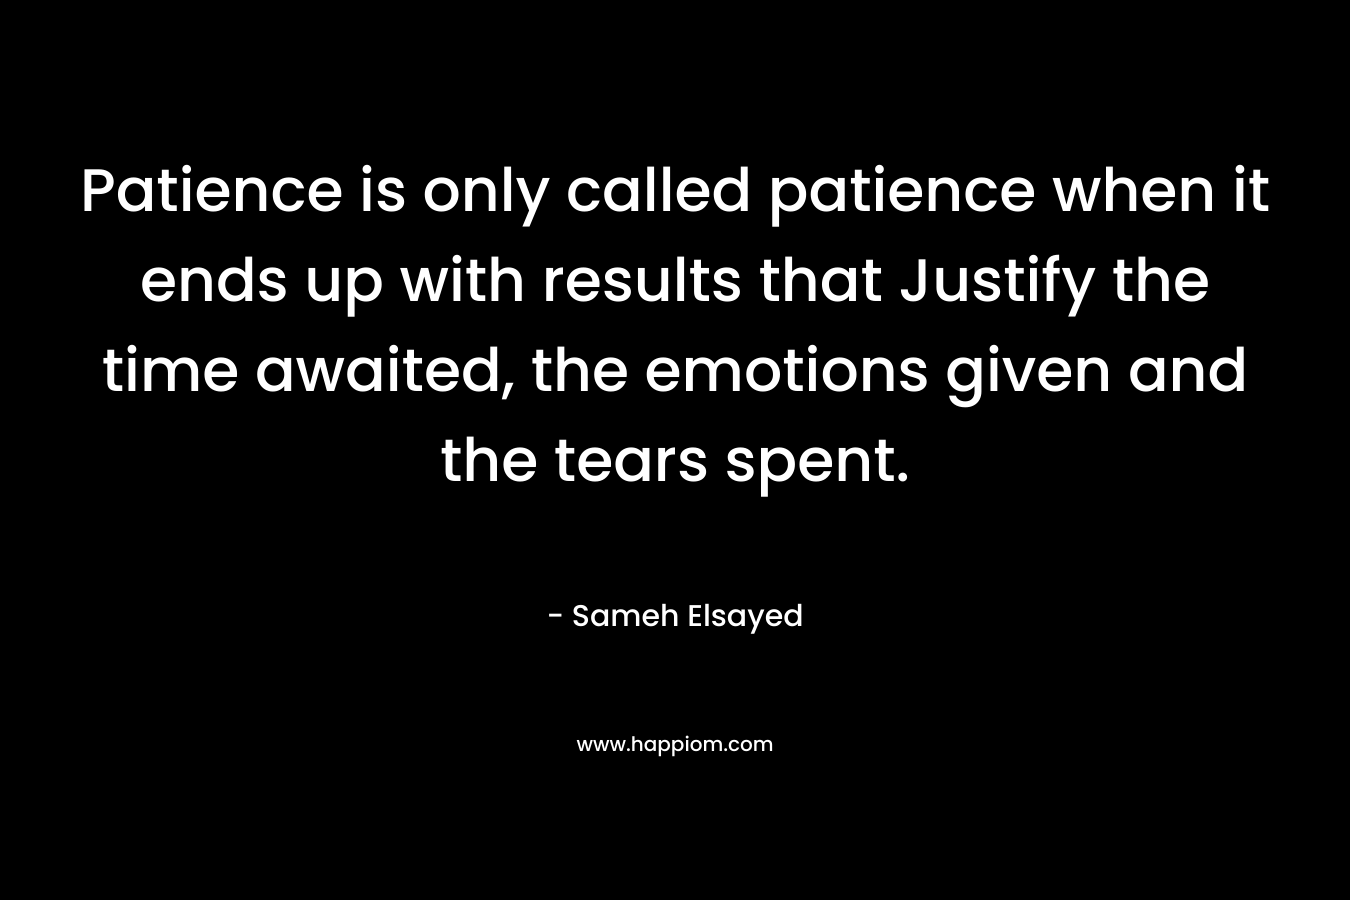 Patience is only called patience when it ends up with results that Justify the time awaited, the emotions given and the tears spent.